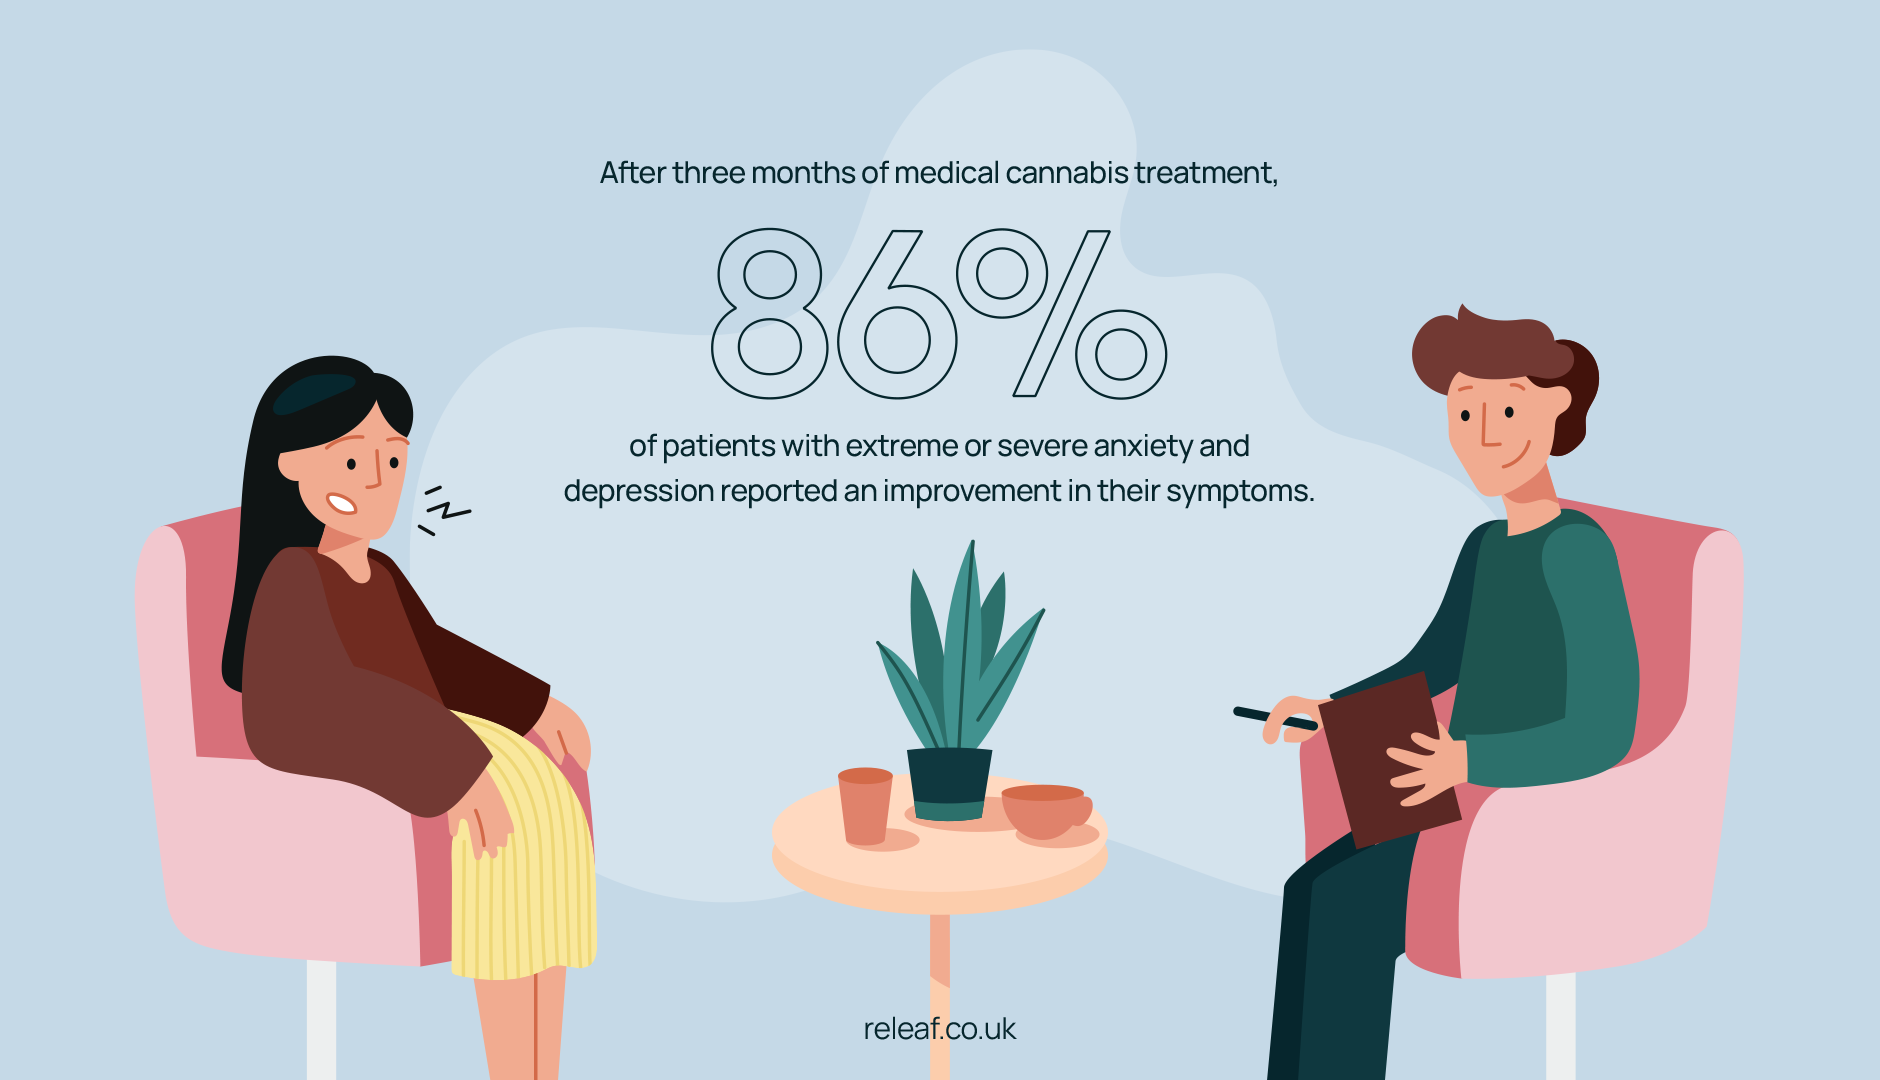 After three months of medical cannabis treatment, 86% of patients with extreme or severe anxiety and depression reported an improvement in their symptoms. 